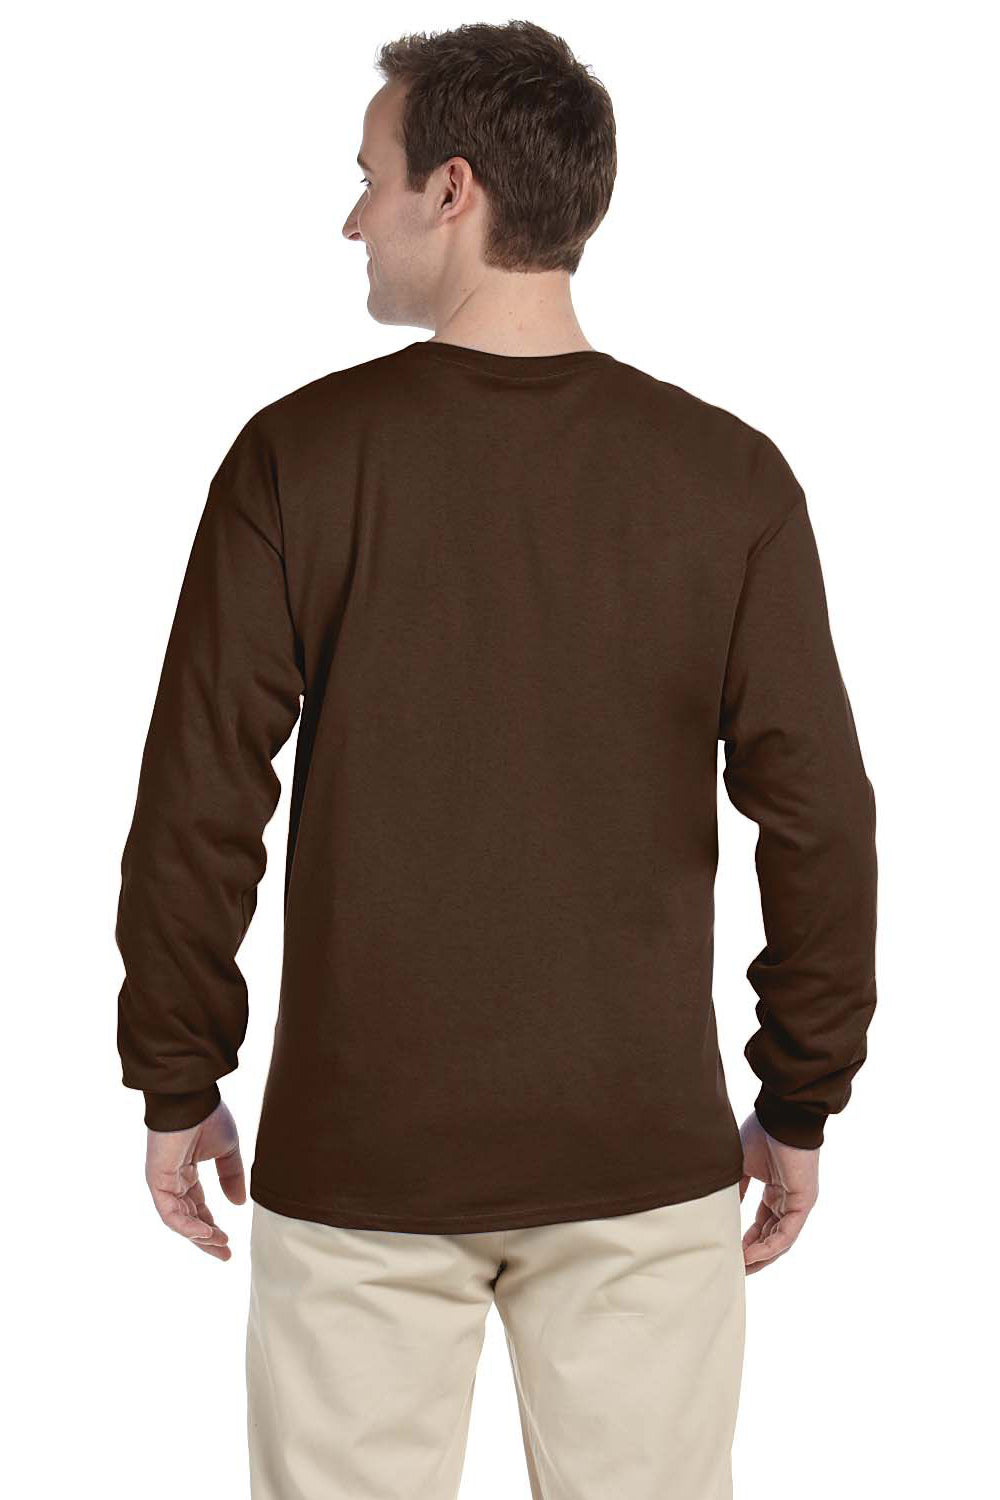 Fruit Of The Loom 4930 Mens HD Jersey Long Sleeve Crewneck T-Shirt Chocolate Brown Back